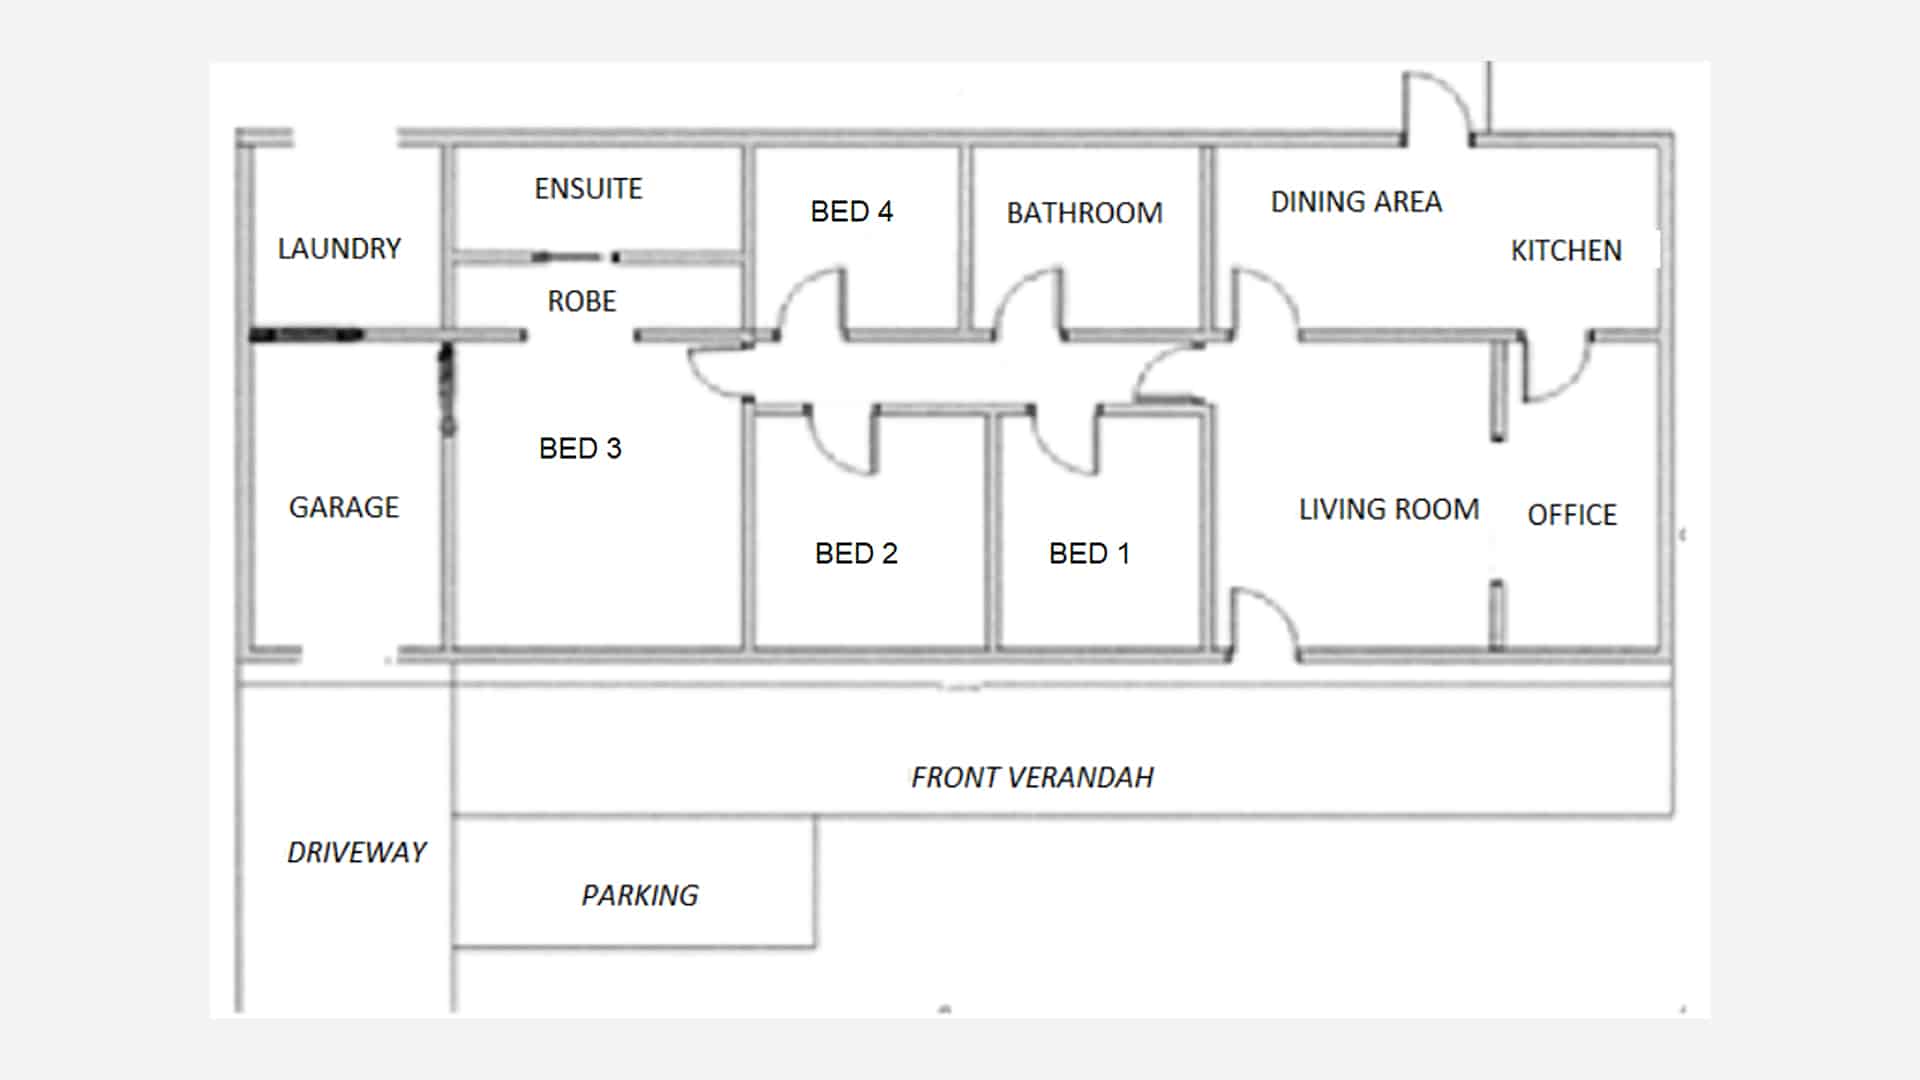 Floorplan of the Hornsby Heights home.